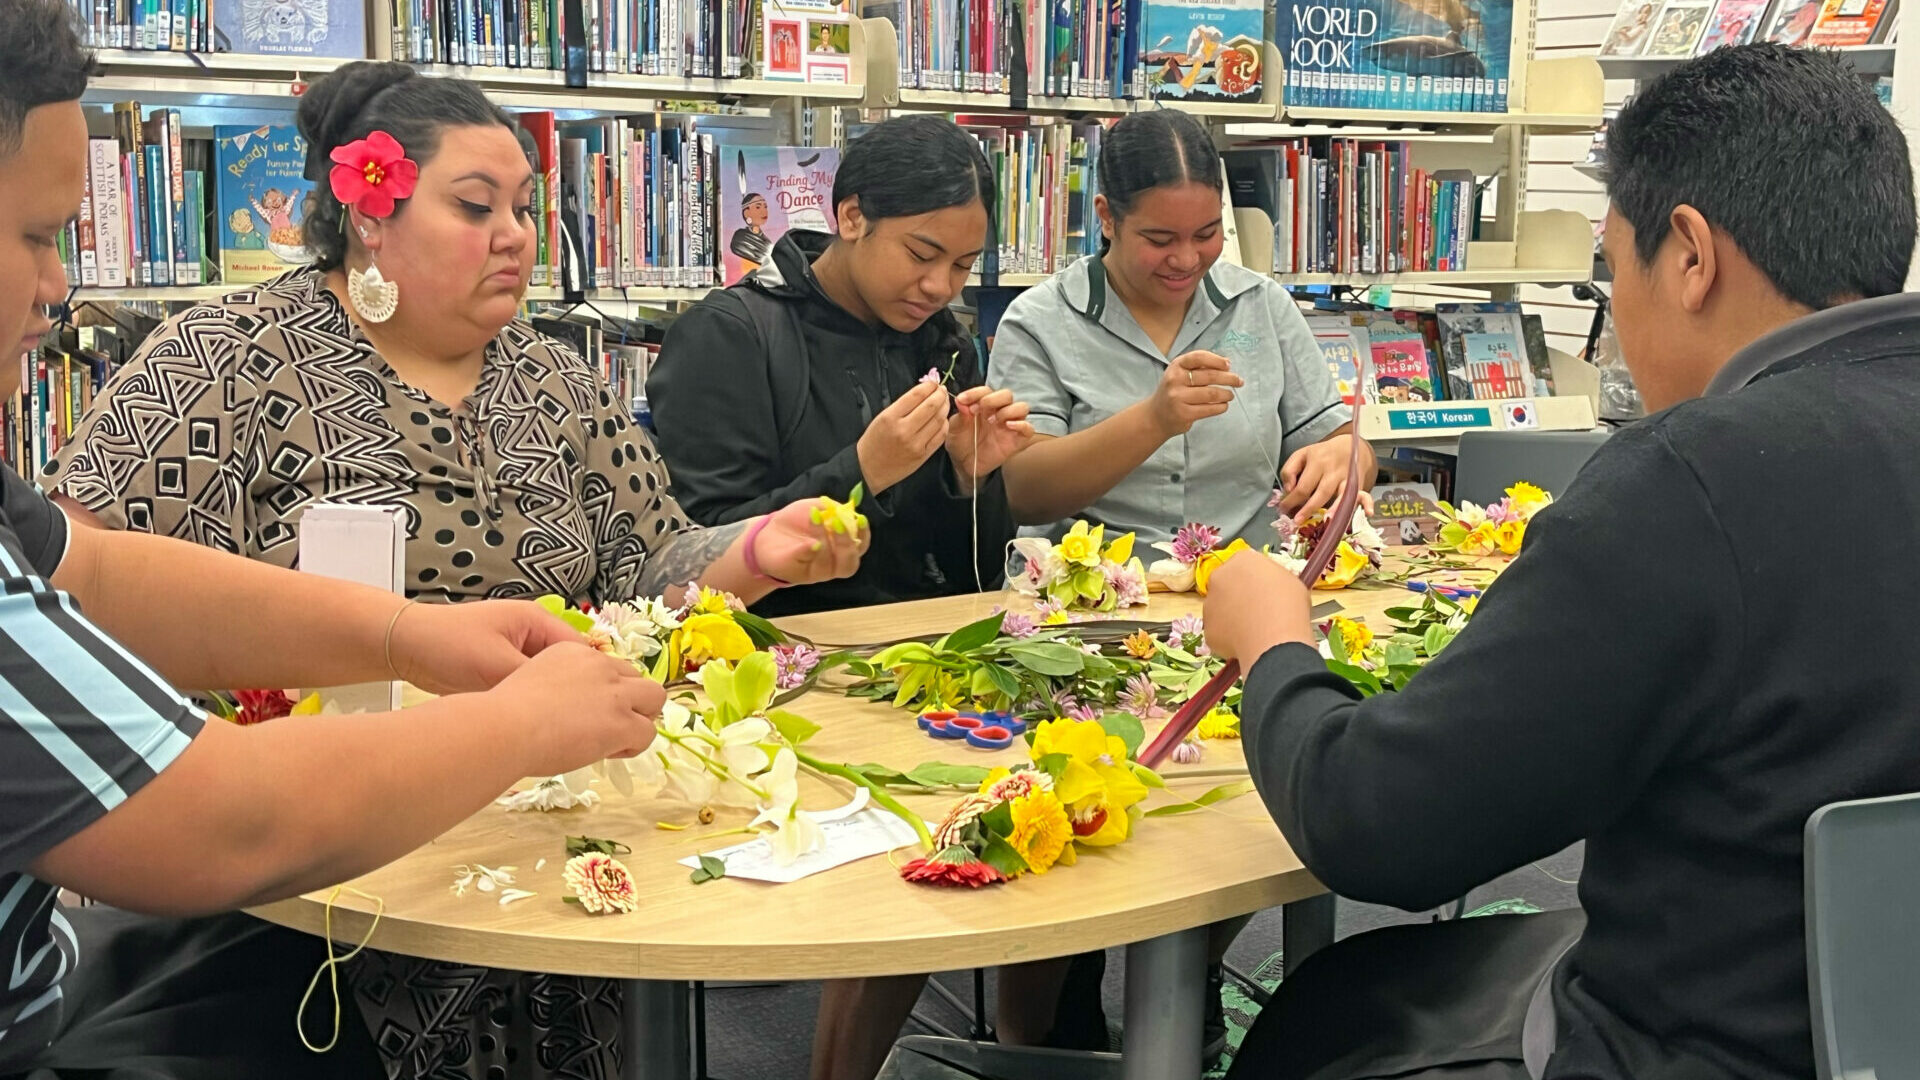 A group of people creating lei in a library